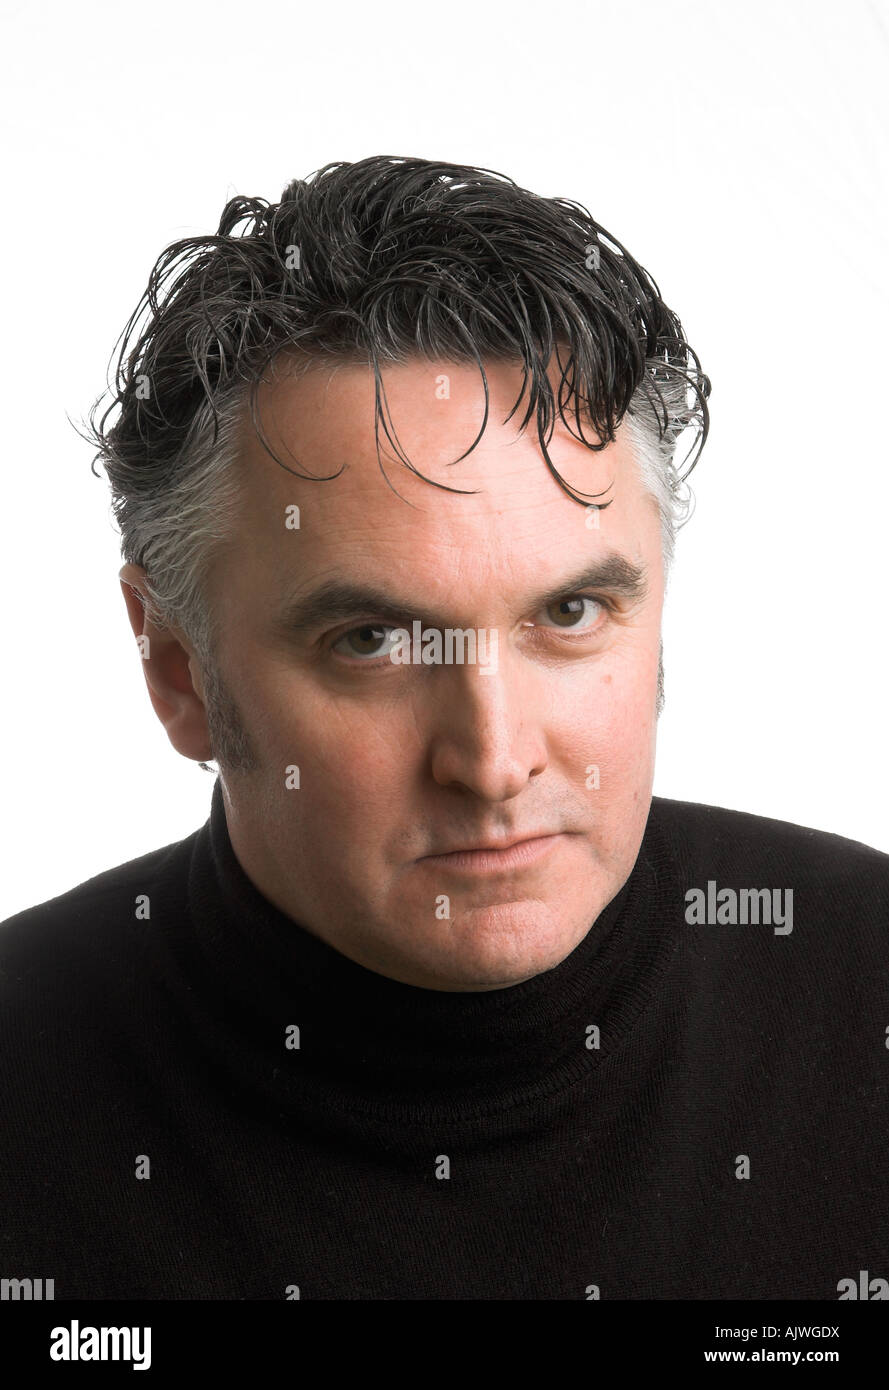 MIddle Aged Man Stock Photo